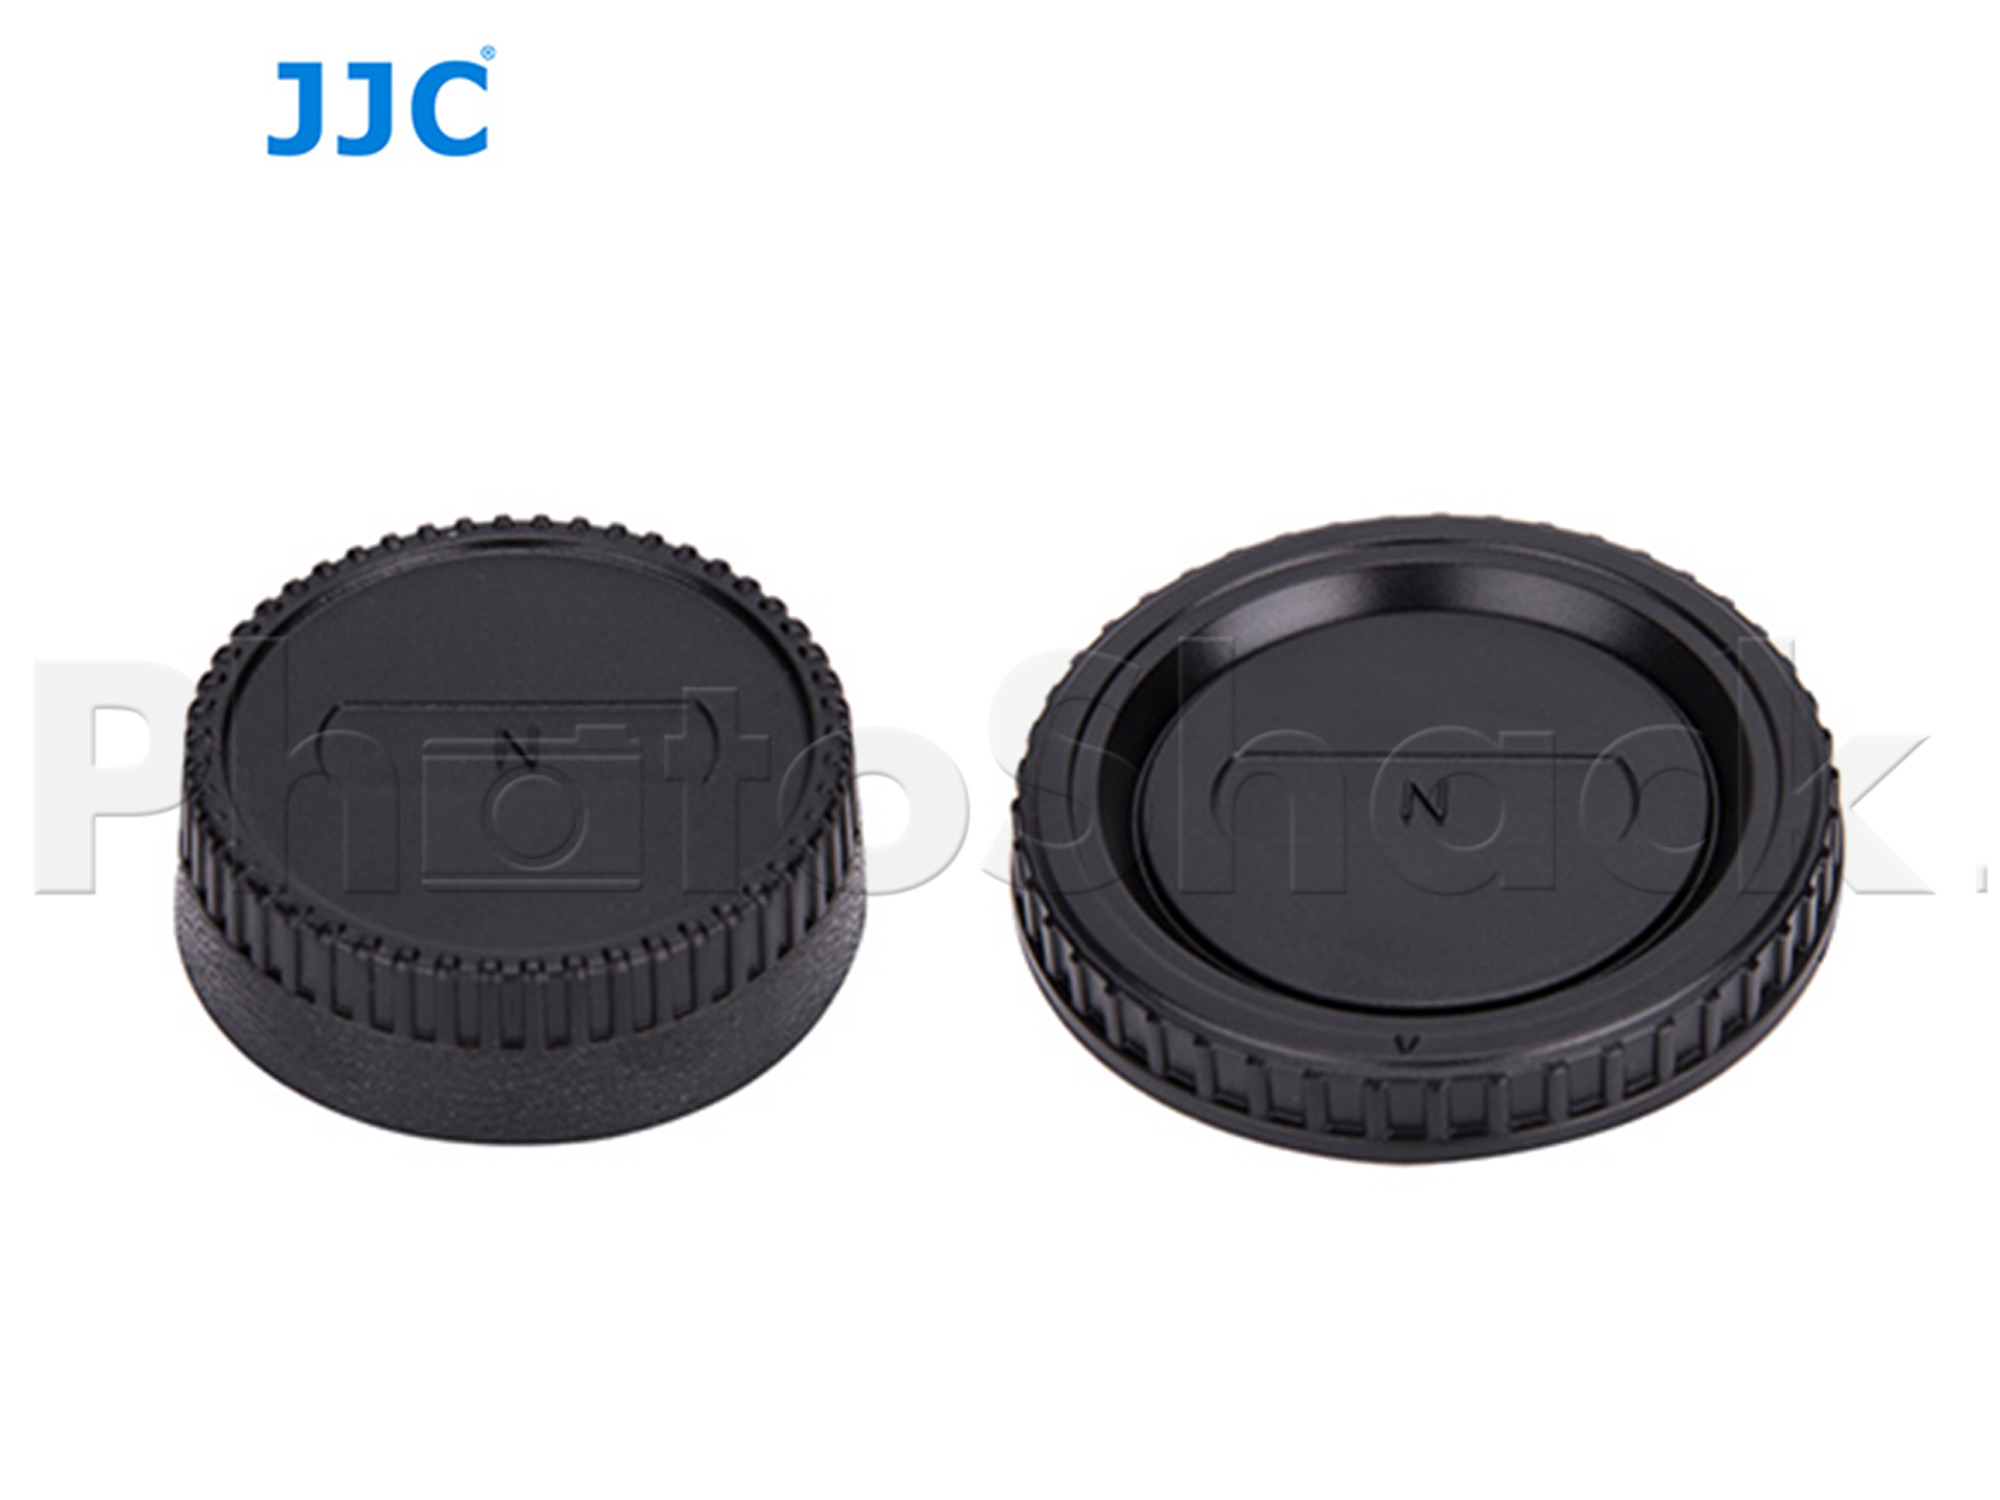 Body and Rear Lens Caps for Nikon F mount